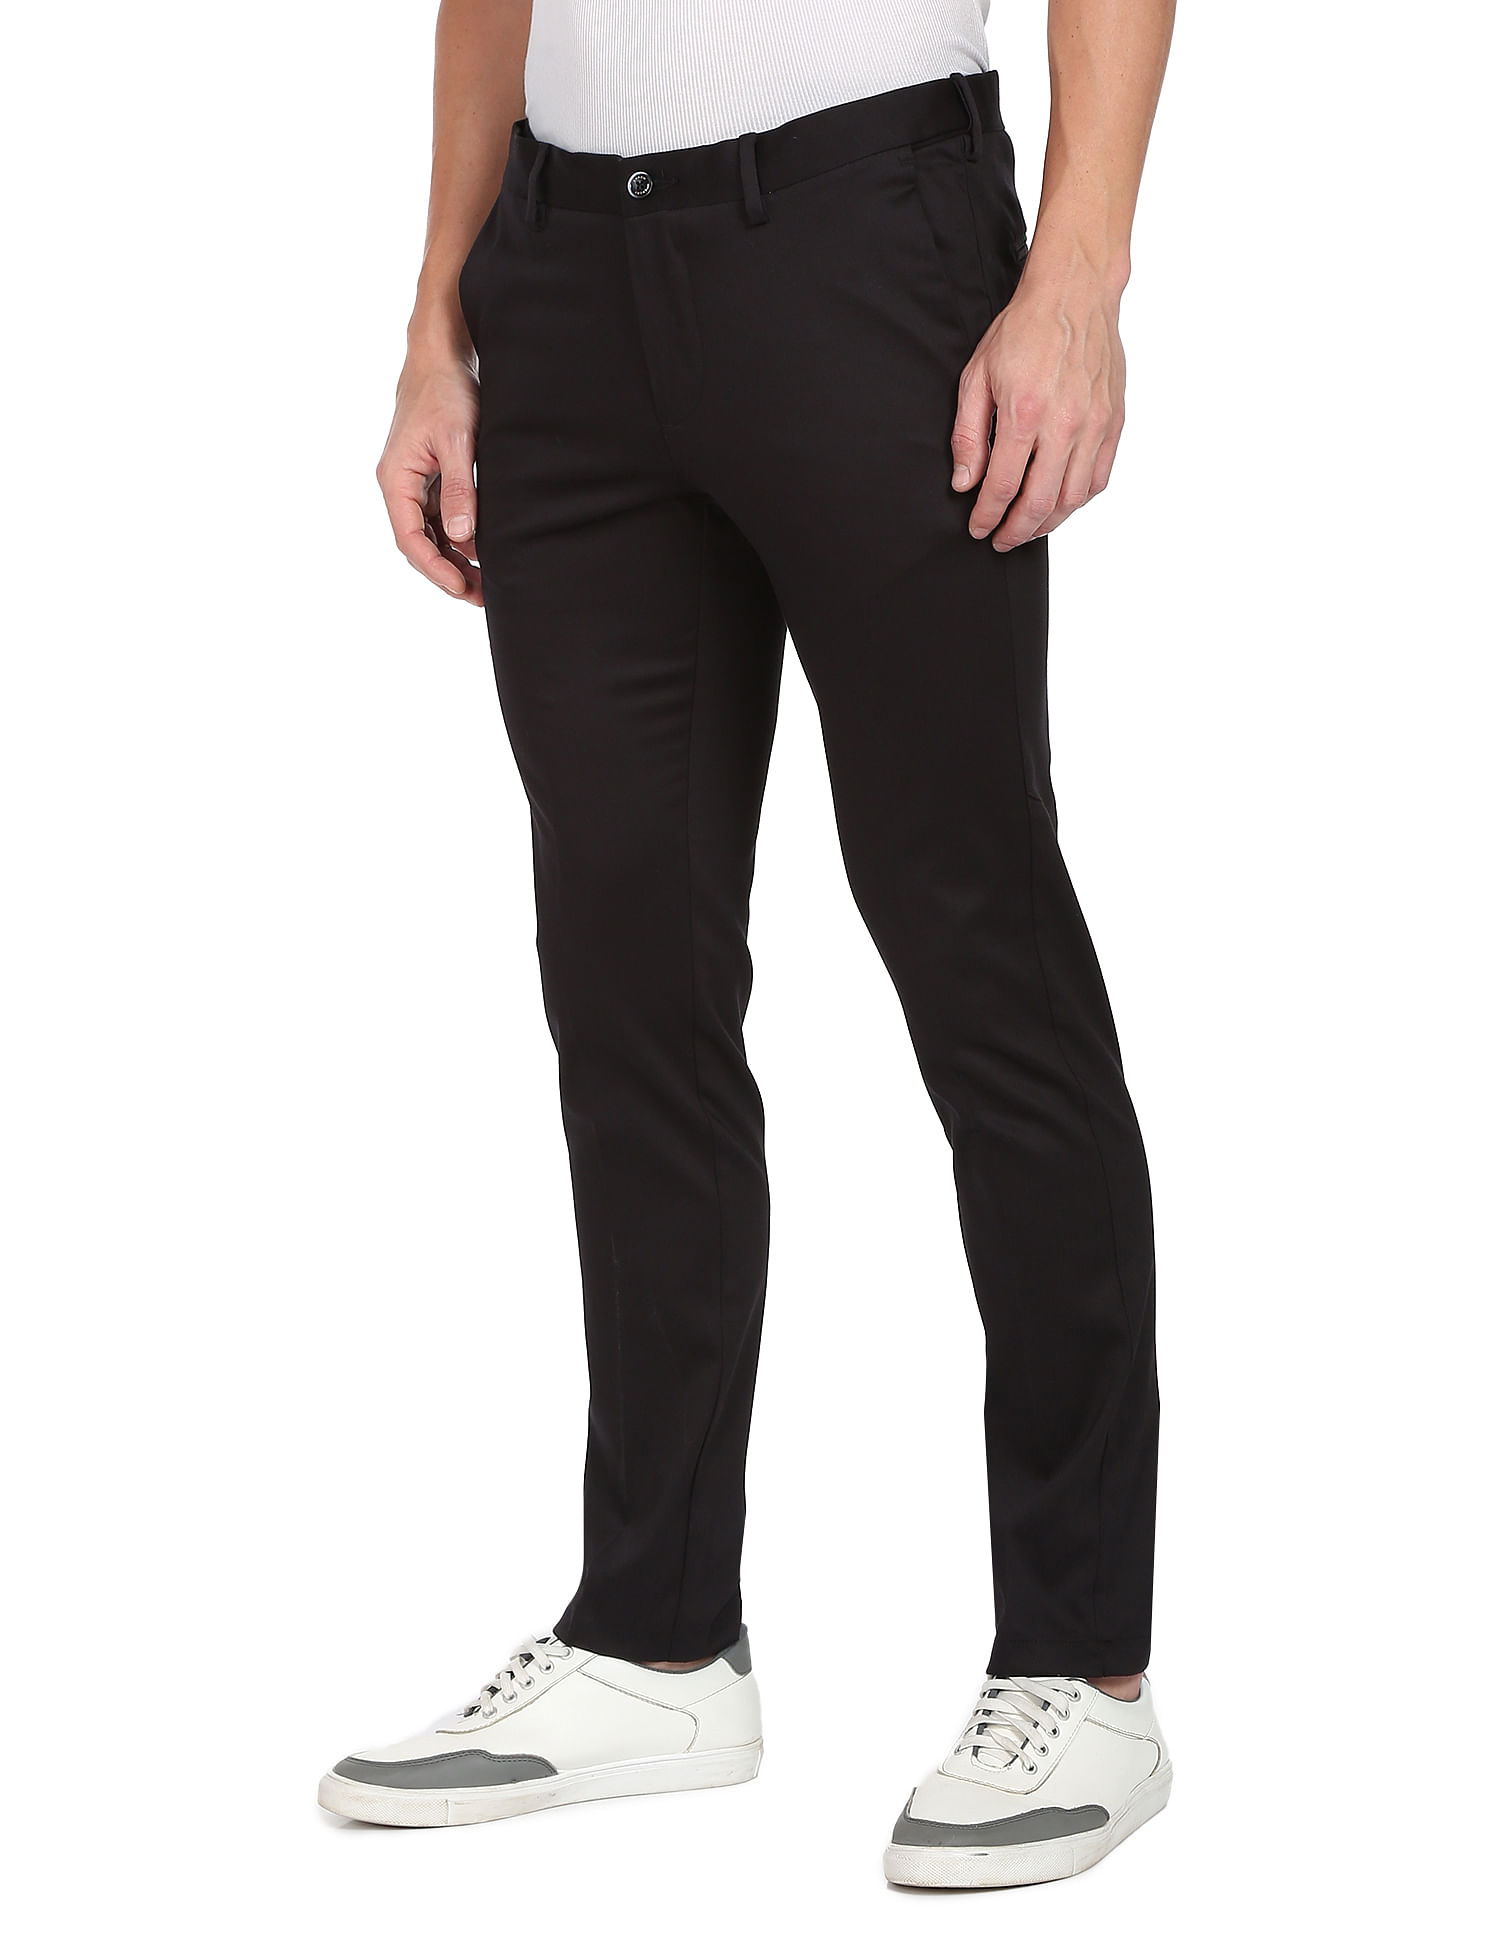 Peter England Trousers  Chinos Peter England Black Casual Trousers for  Men at Peterenglandcom